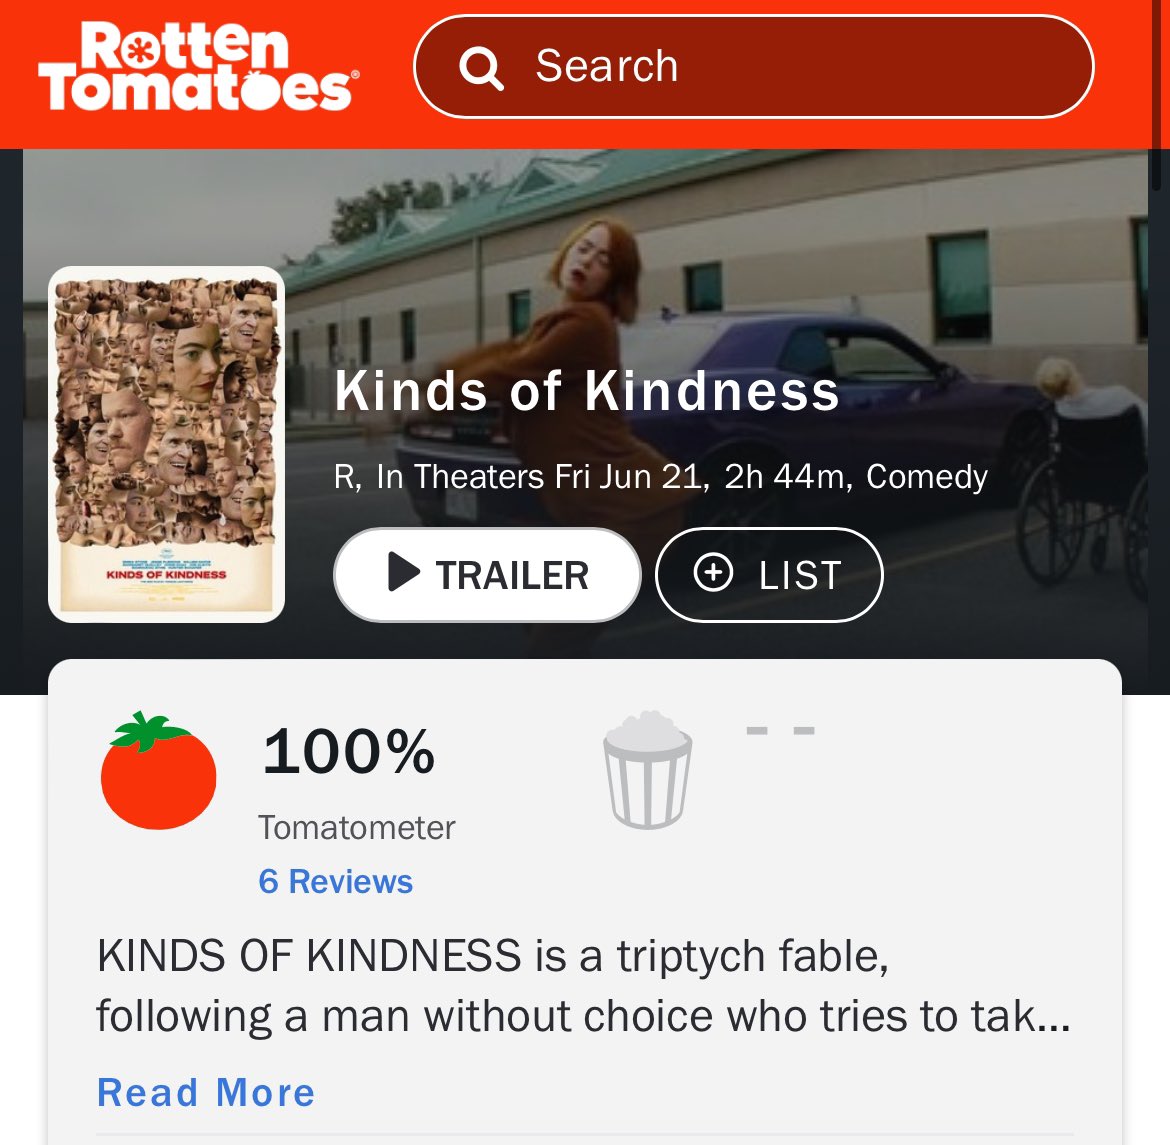 Yorgos Lanthimos’ KINDS OF KINDNESS debuts with 100% on Rotten Tomatoes.